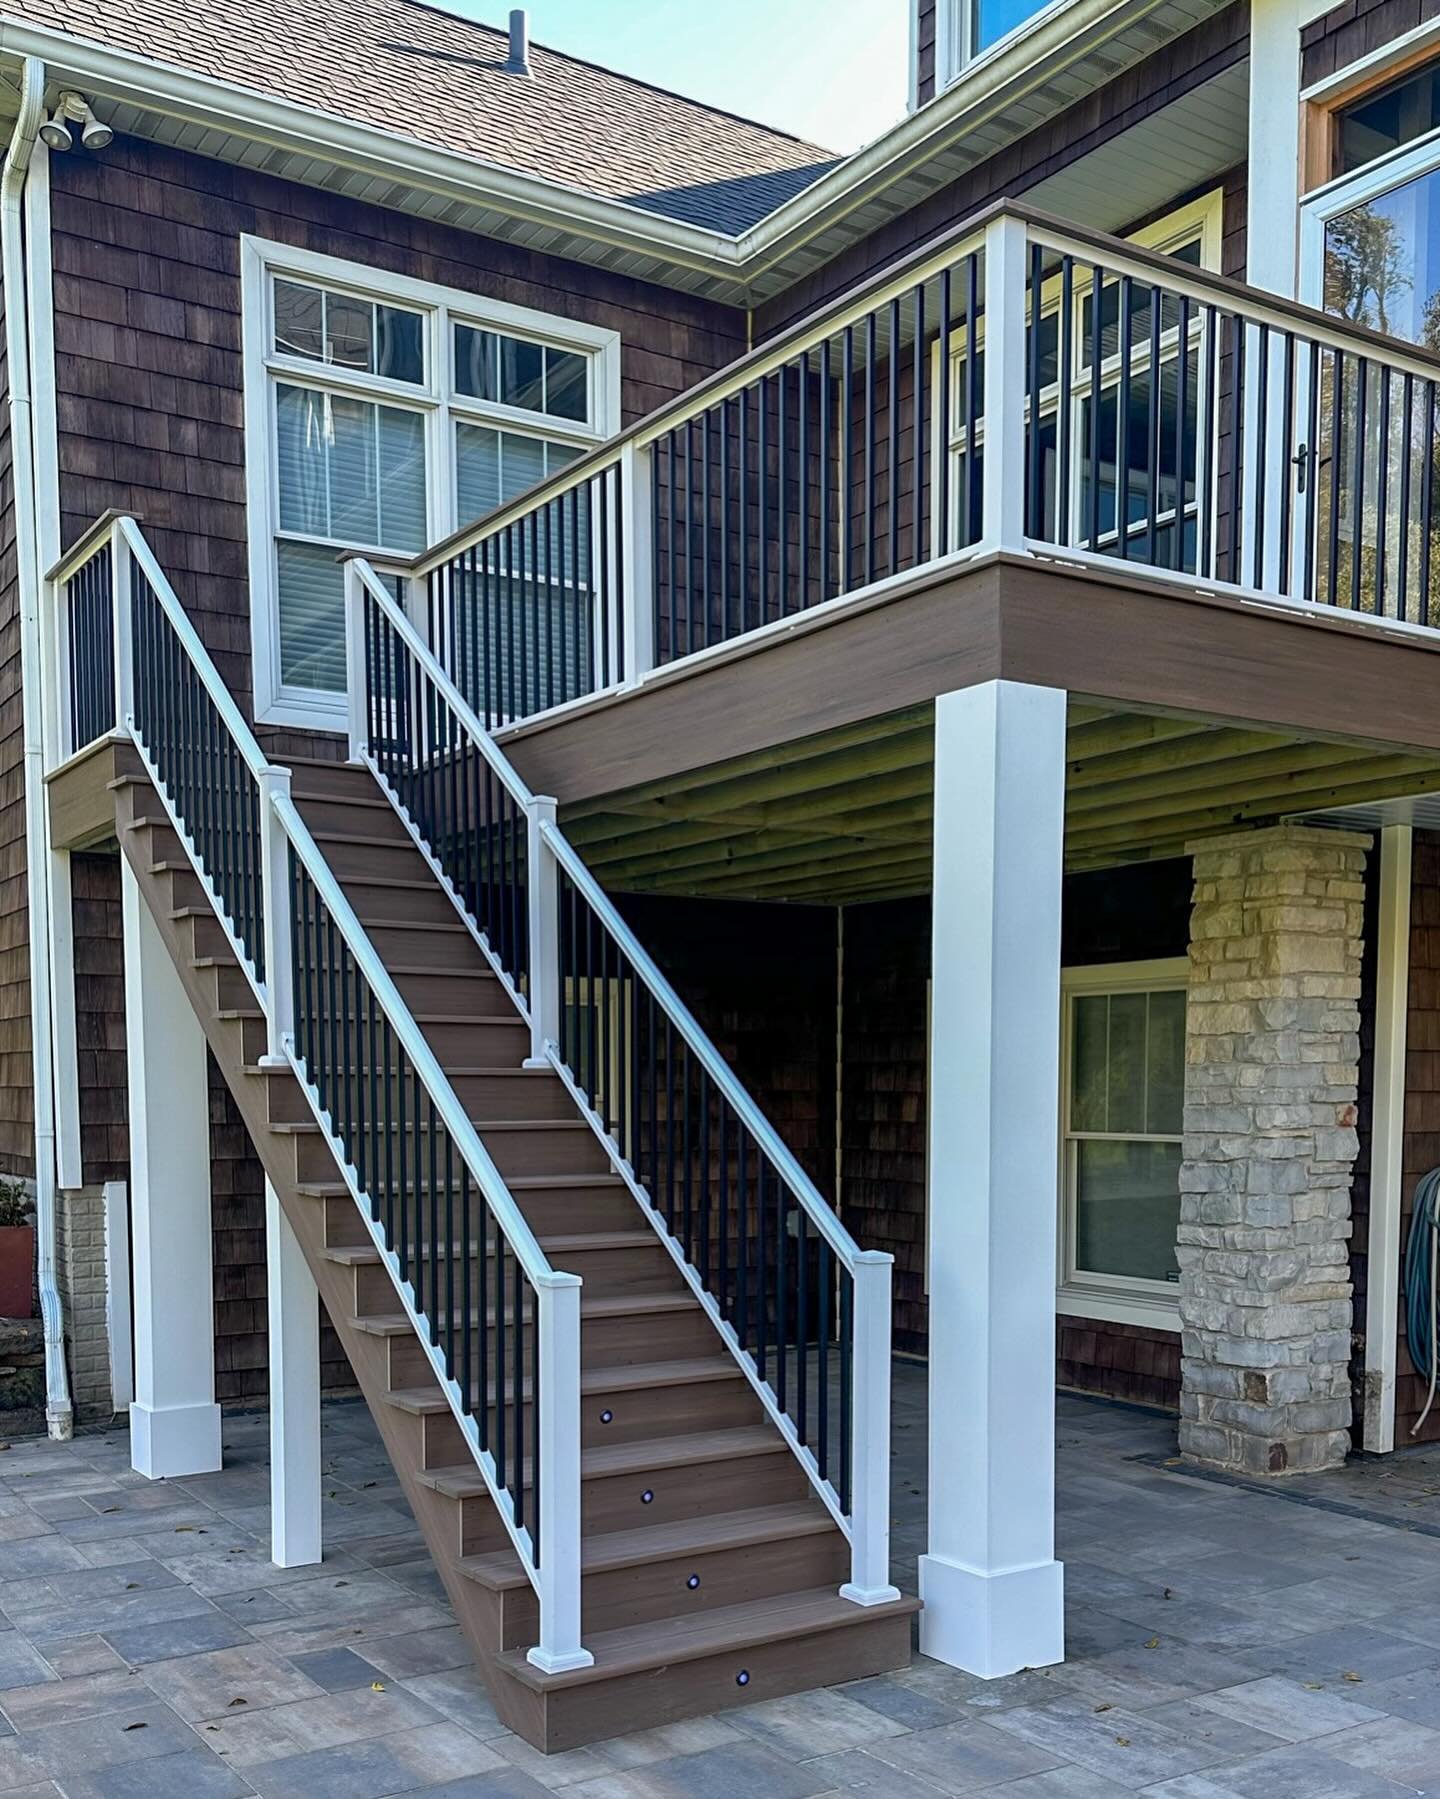 While wrapping your support posts to hide the treated lumber can be a splurge, it&rsquo;s one we absolutely feel is worth it! 

What do you think? Would you splurge?
.
.
.
#deck #compsite #posts #postwrap #maintenancefree #pfitzs #iowa #illinois #qua